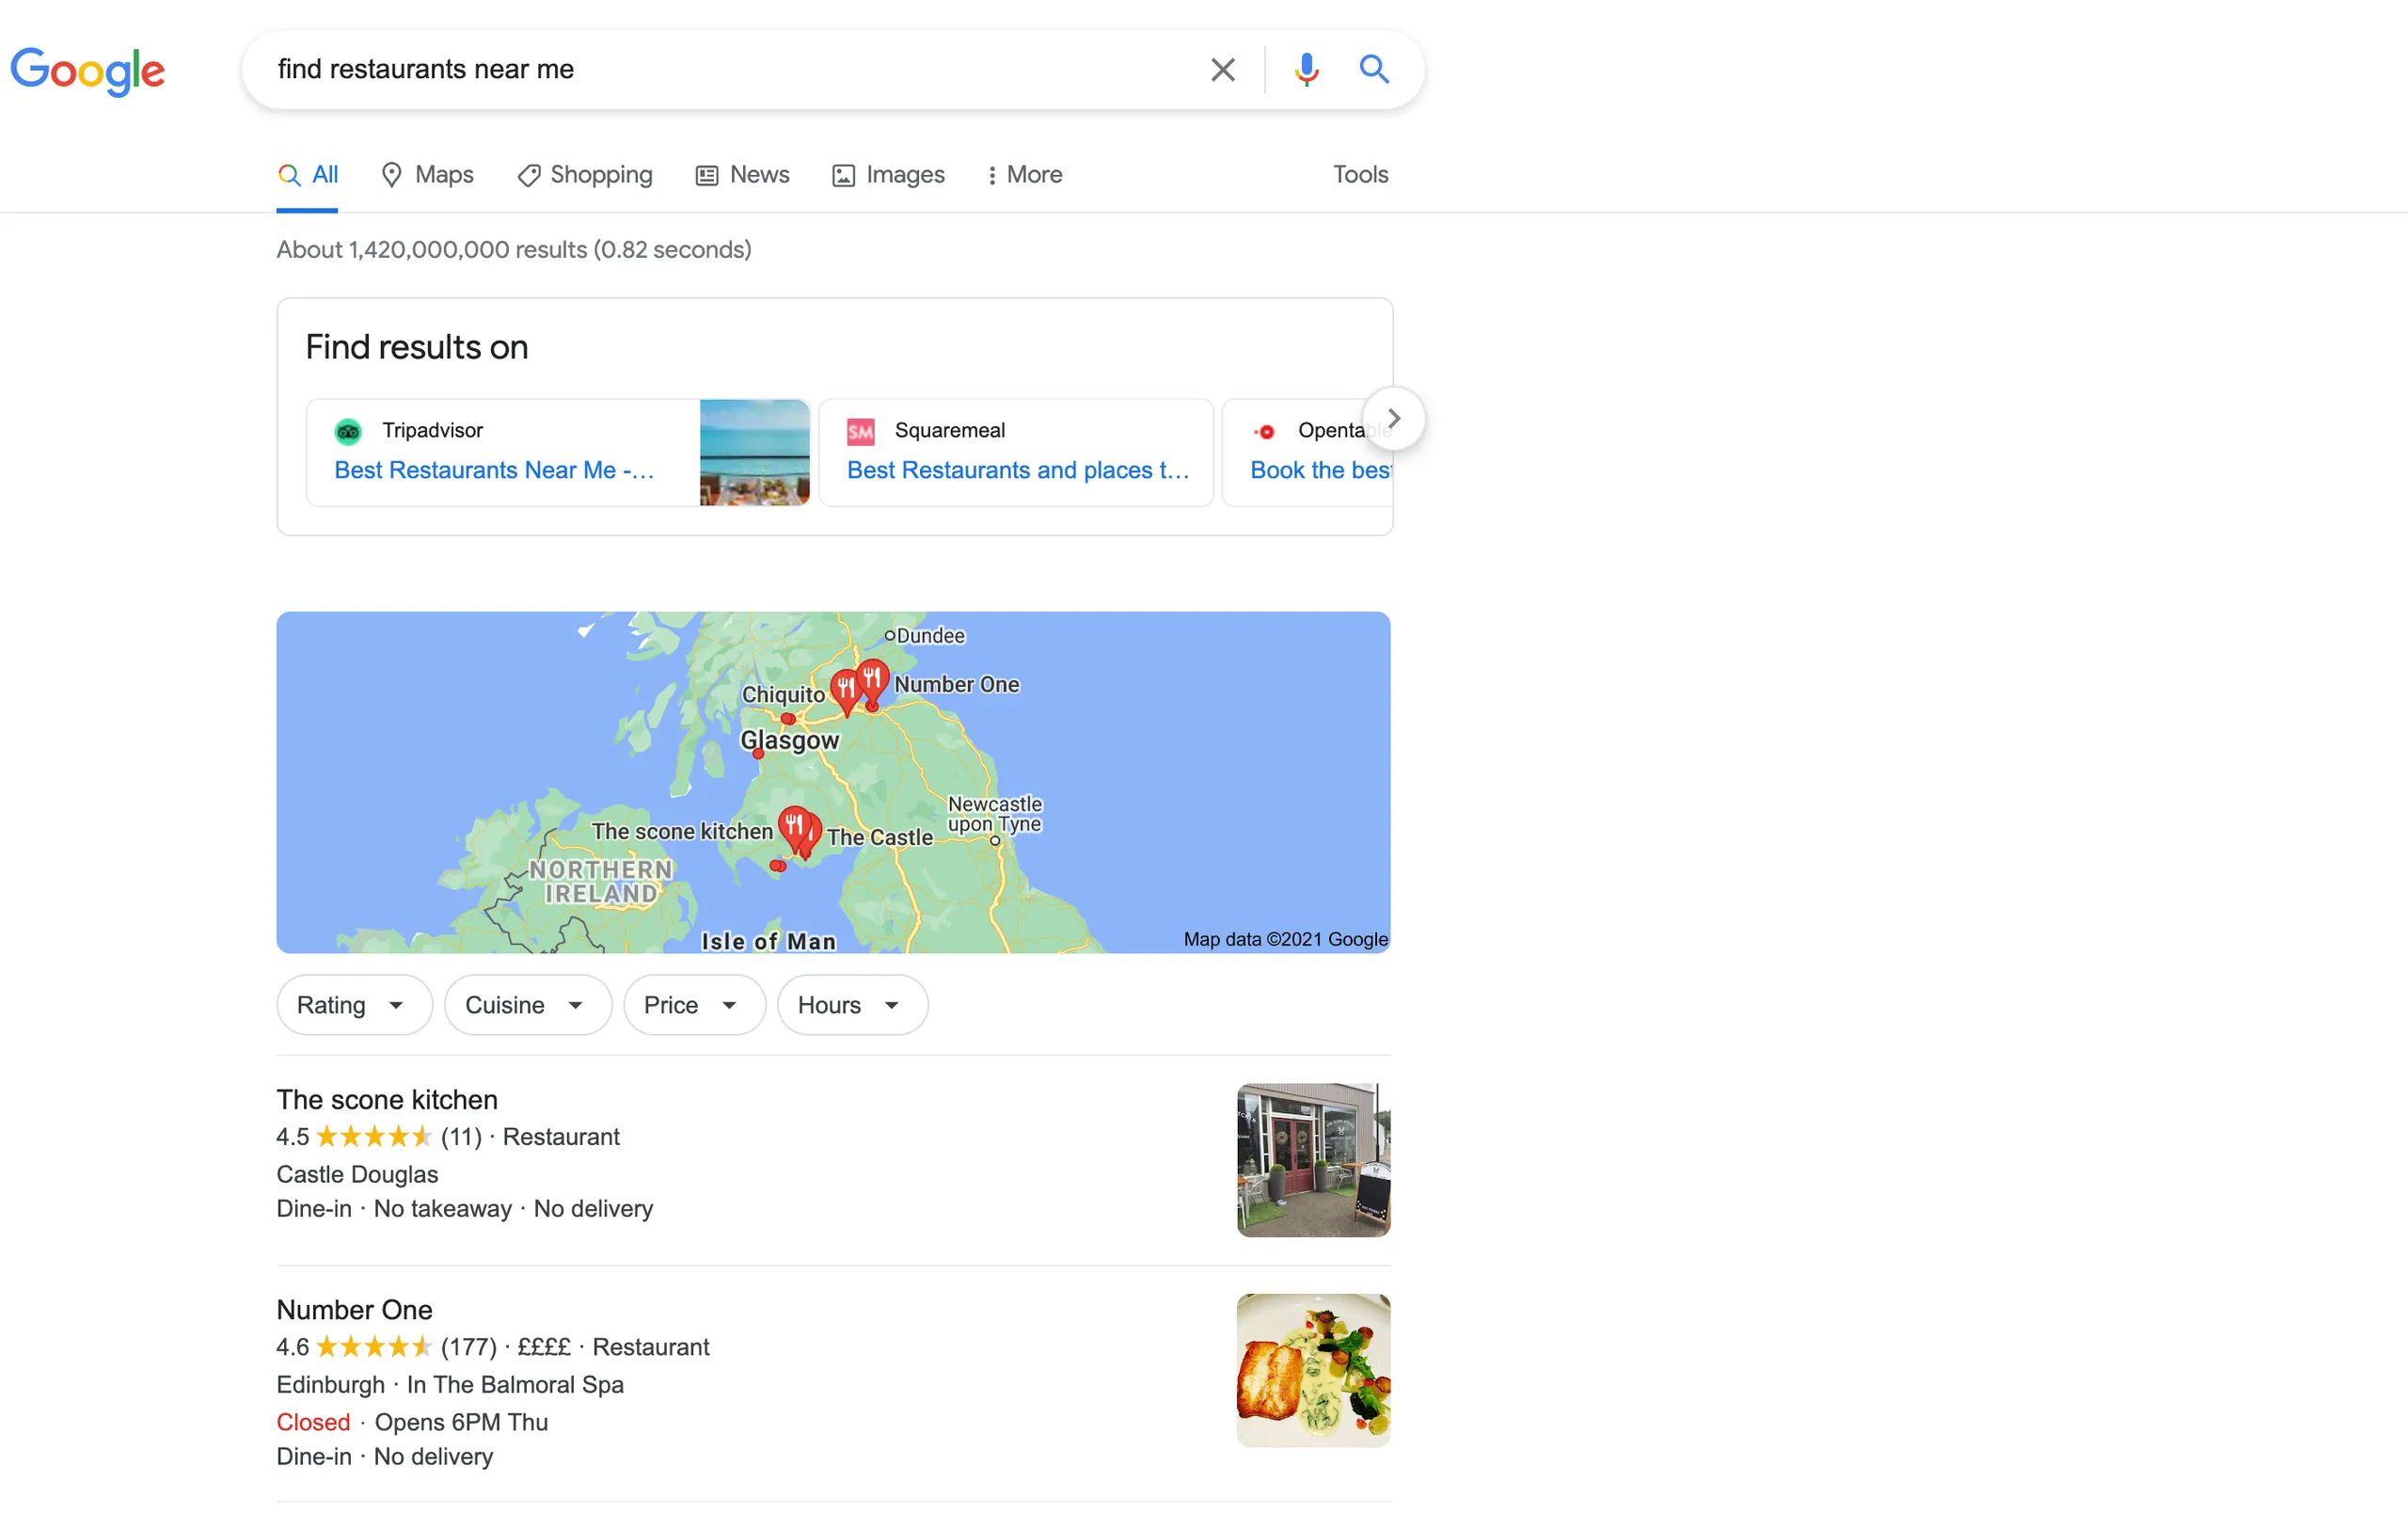 Find restaurants near me in Google search results showing local results